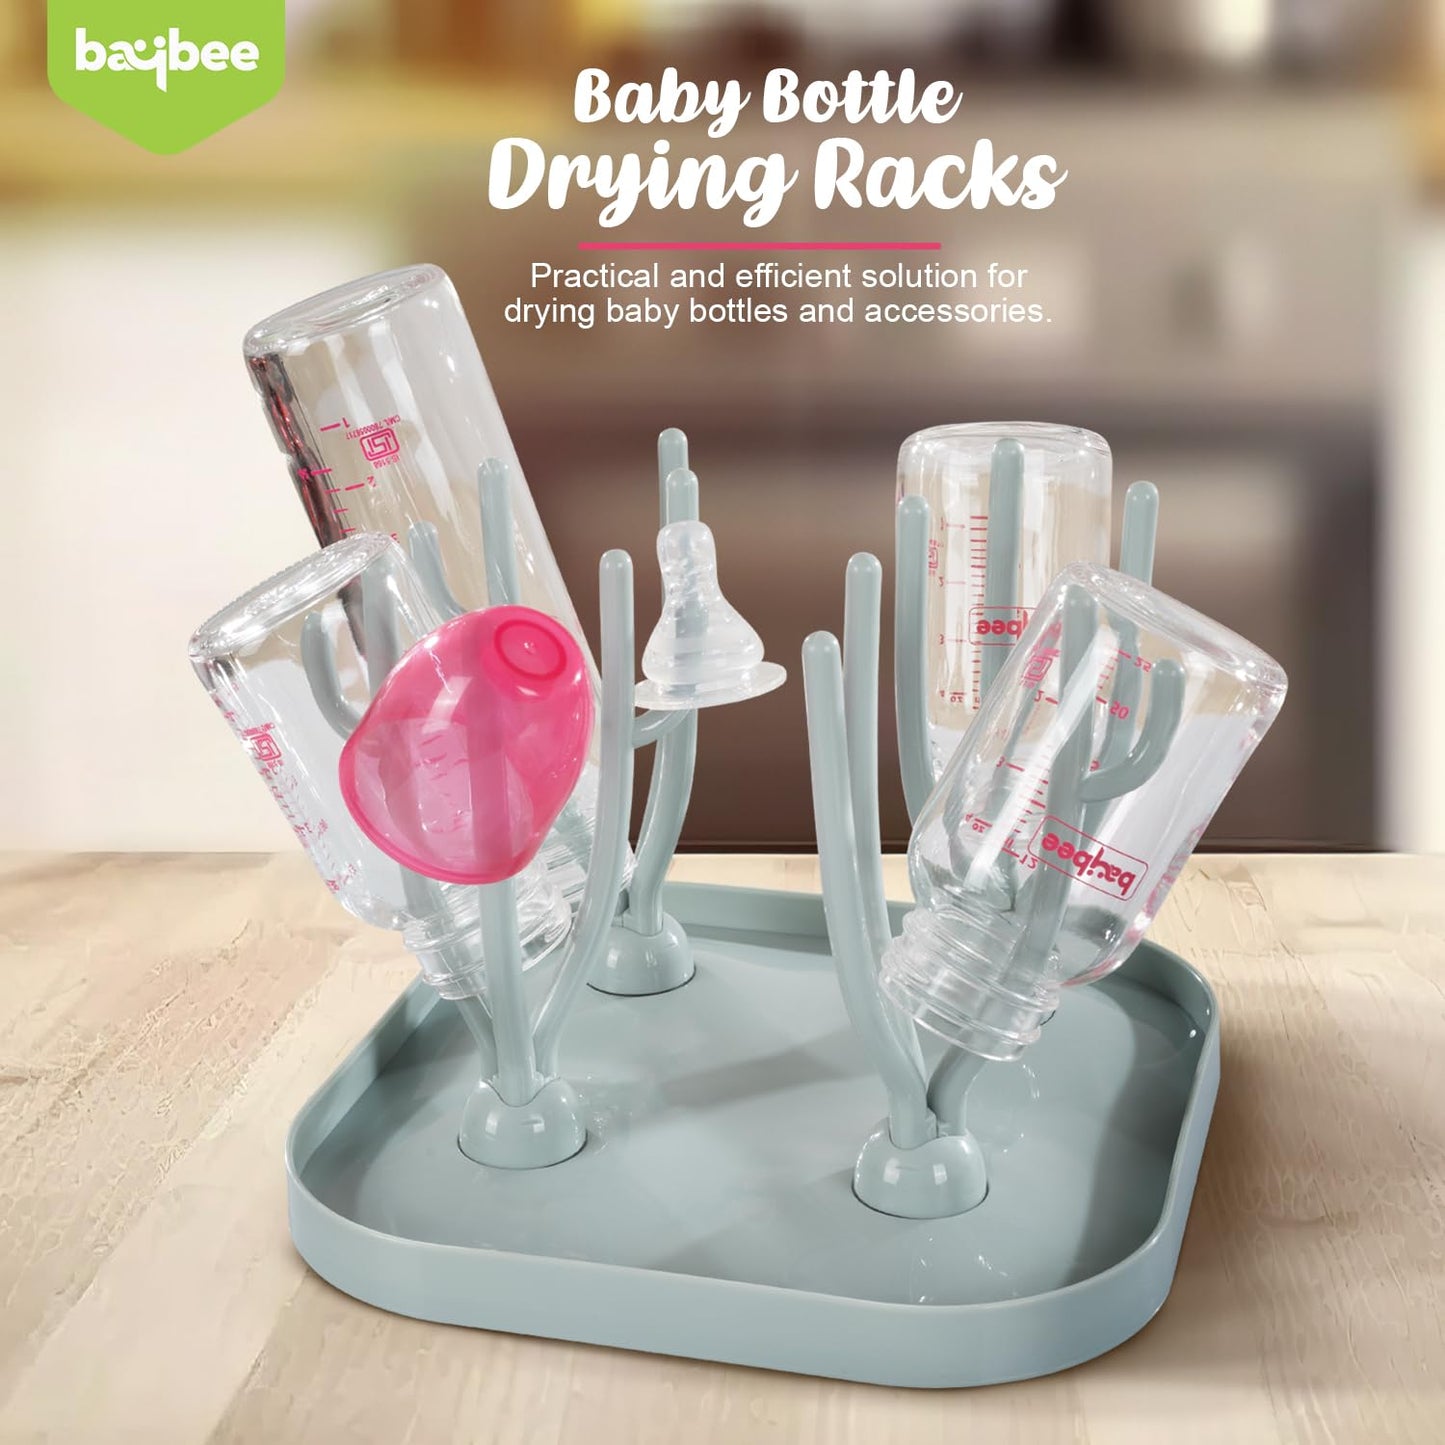 Baybee Baby Bottle Drying Rack for Babies, Baby Sterilizer and Dryer for Feeding Bottles with 16 Racks